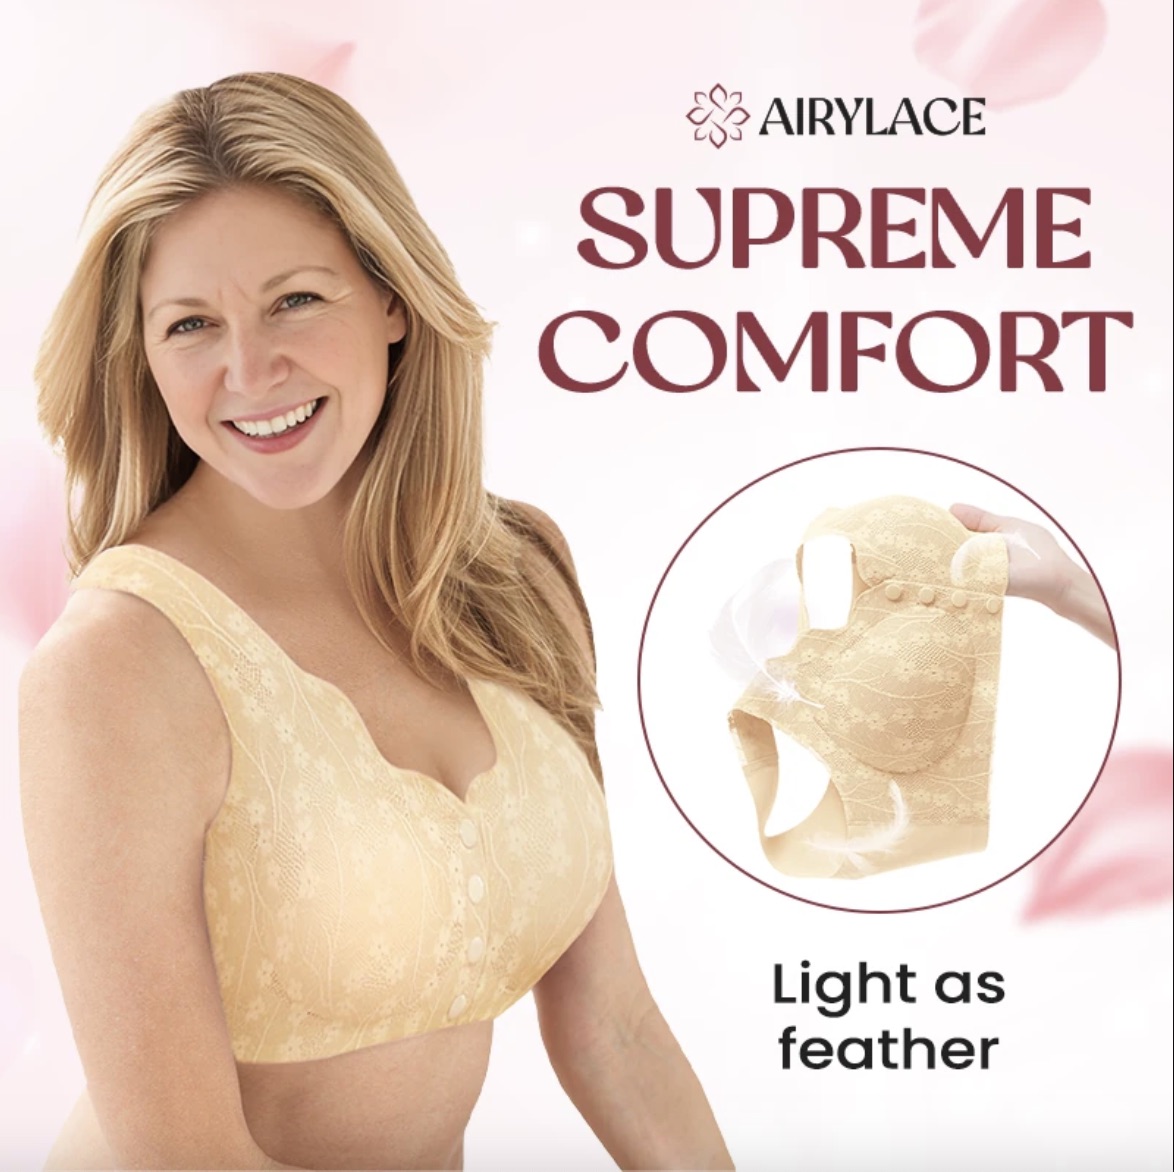 AiryLace - Zero Feel Lace Full Coverage Front Closure Bra